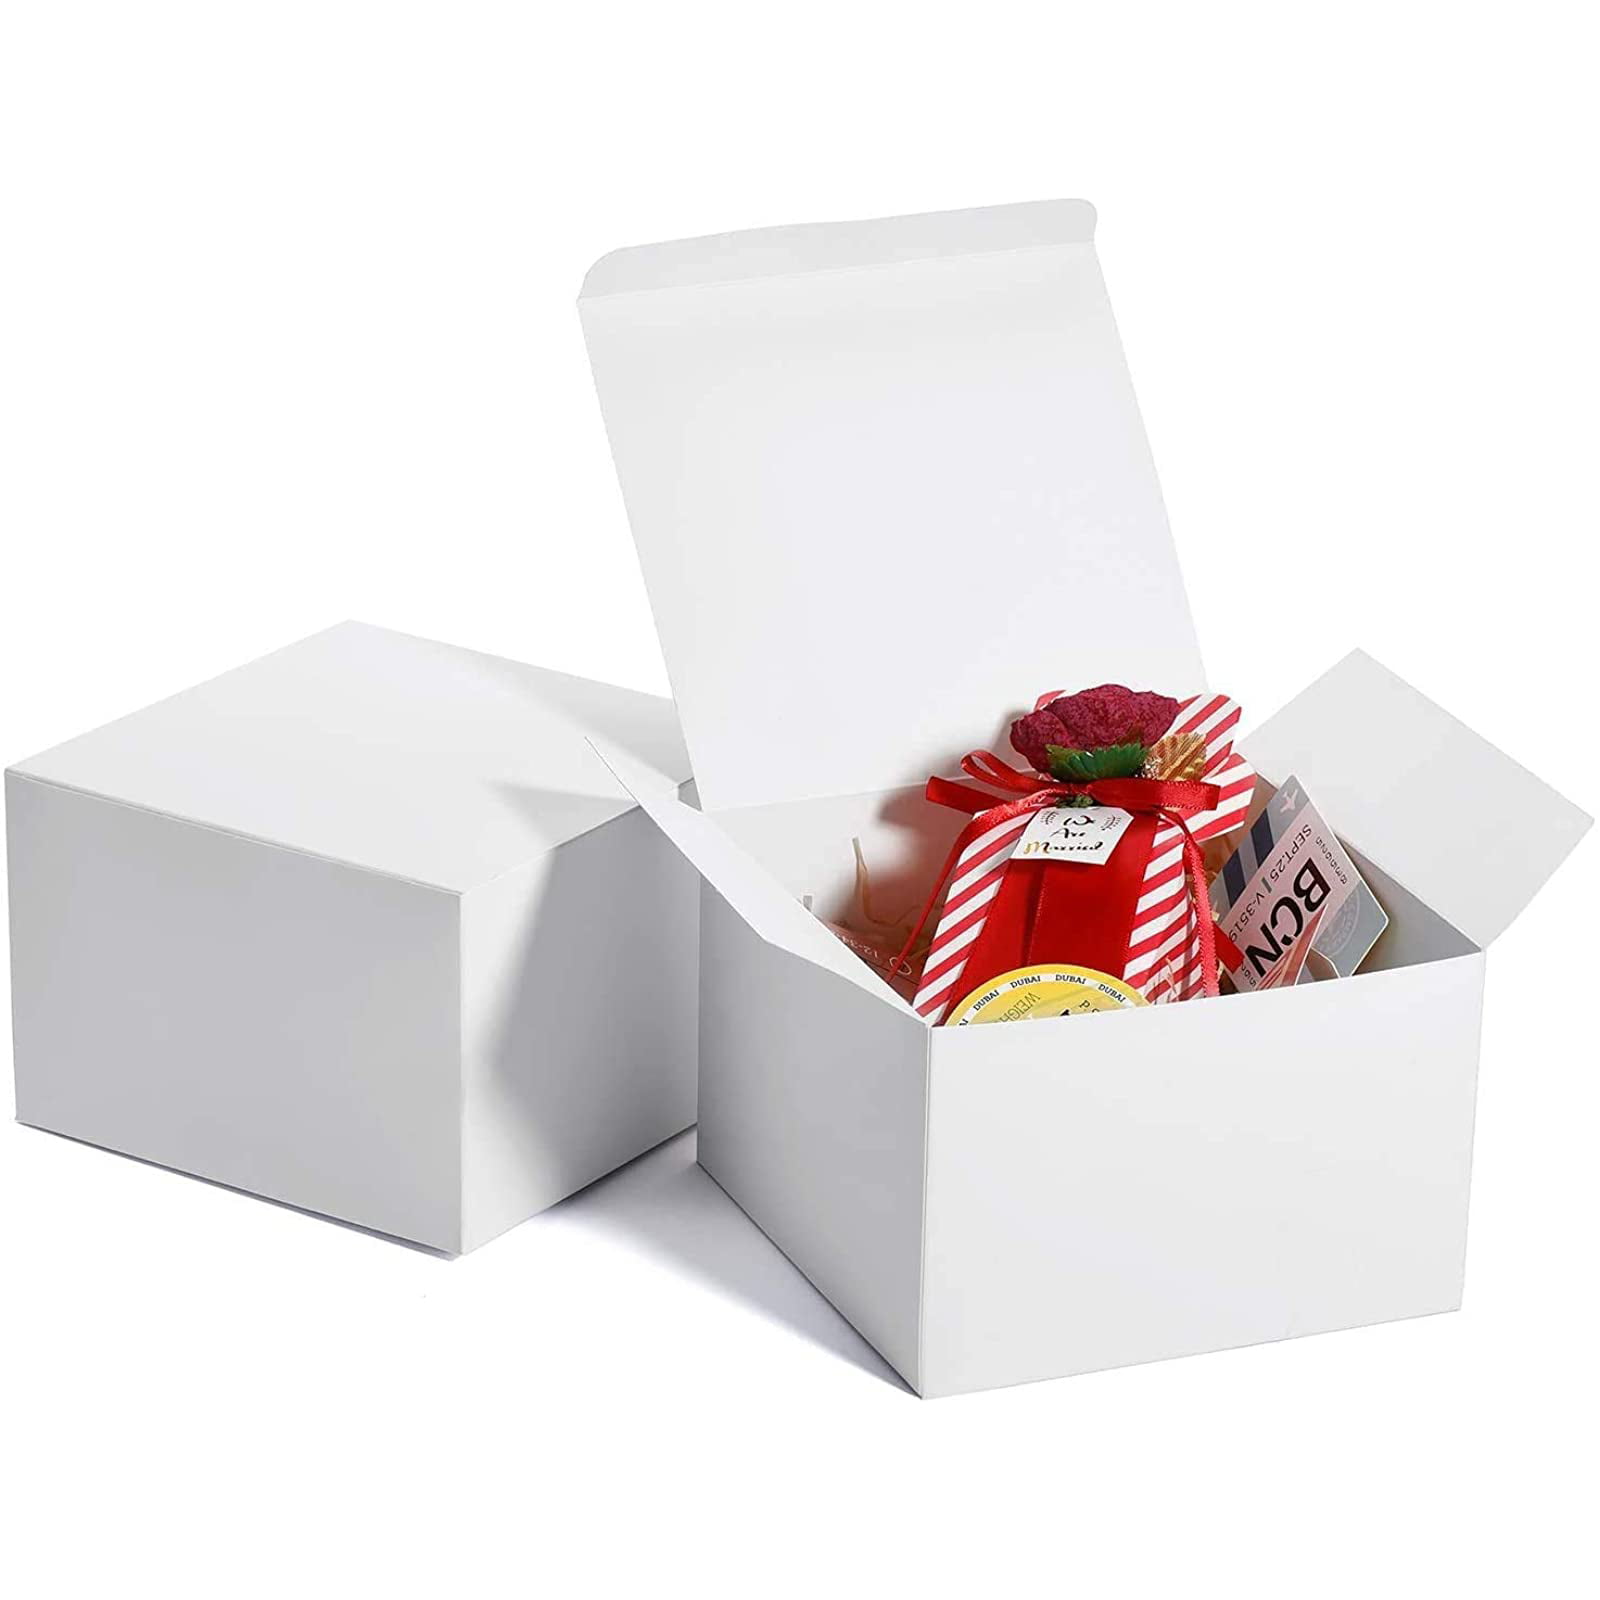 MESHA Cardboard Gift Boxes 25 Pcs5X5X3.5in Favor for